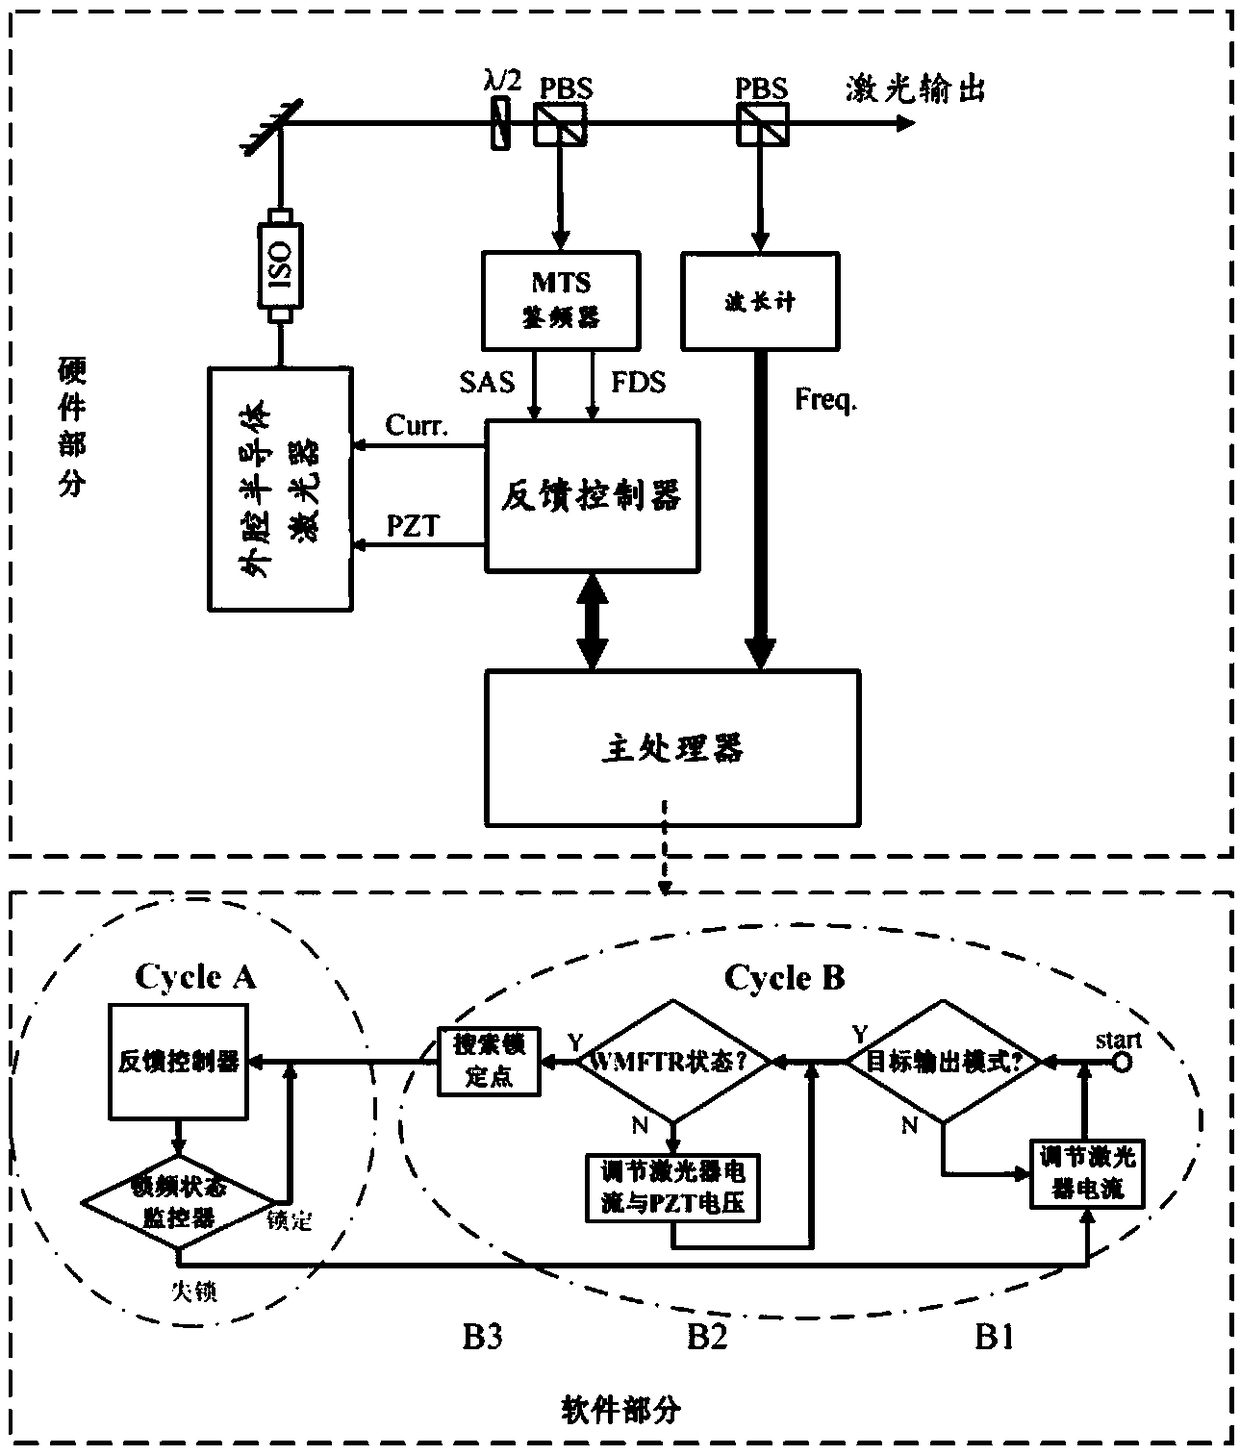 Automatic laser frequency stabilization system based on intelligent saturated absorption spectrum recognition technology